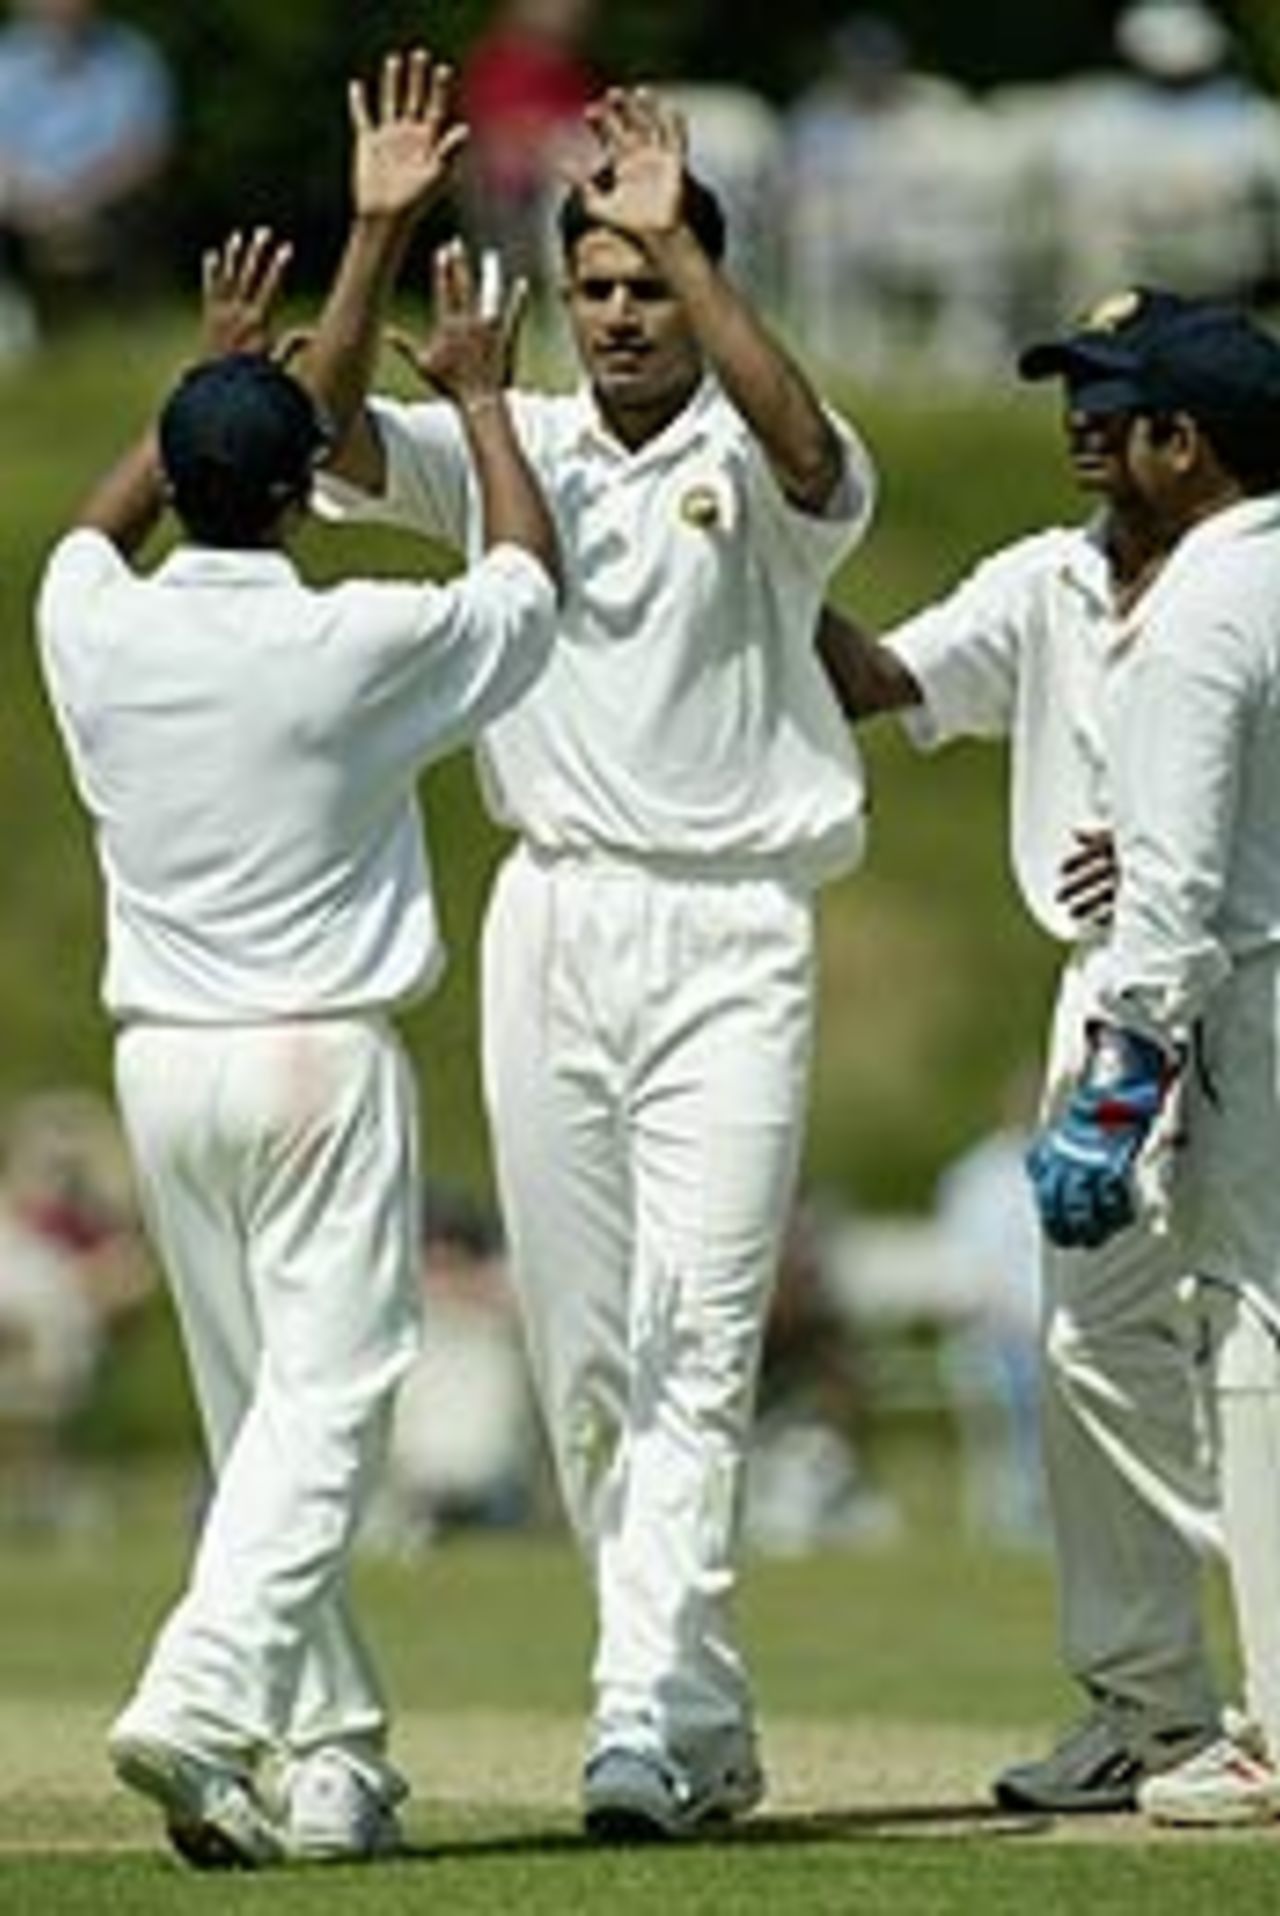 Irfan Pathan jnr celebrates a wicket, India A v South Africa, Arundel, July 20, 2003